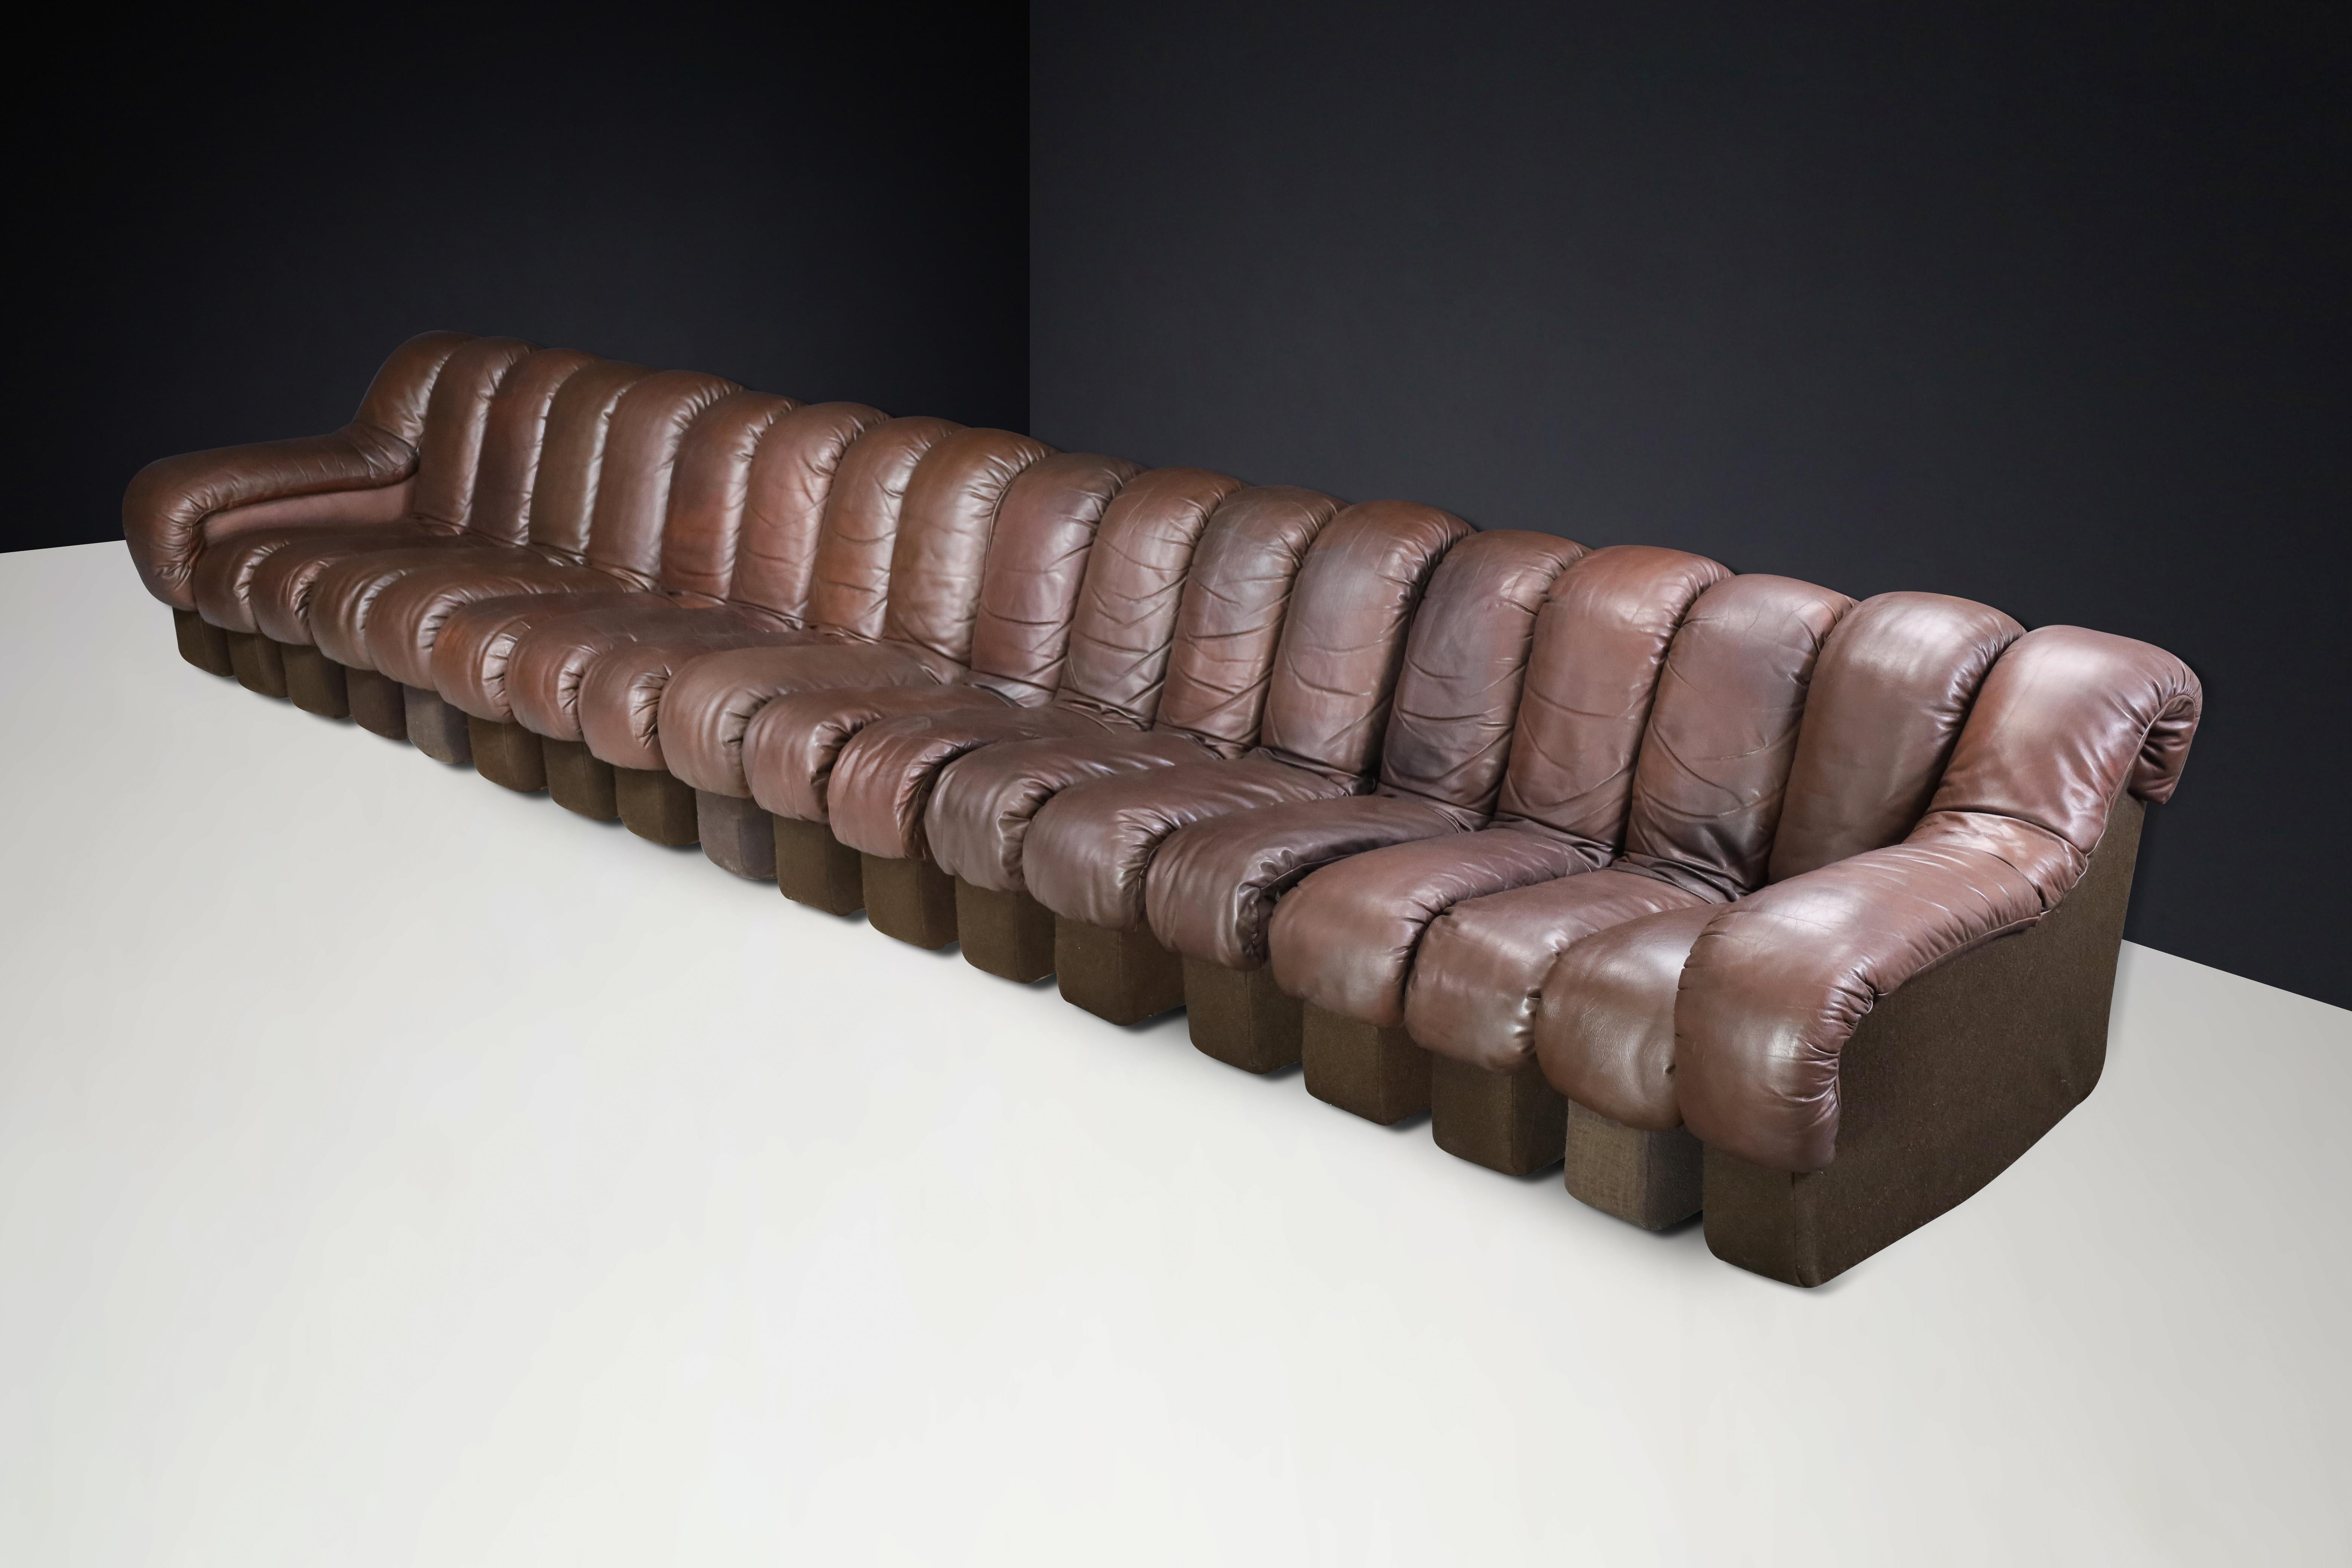 De Sede DS-600 'Snake' Sectional Sofa in Patinated Brown Leather by Ueli Berger, Switzerland 1972.

The De Sede DS-600 'Snake' Sectional Sofa is a mid-century modern sofa made in Switzerland from high-quality brown leather. It was designed by Ueli